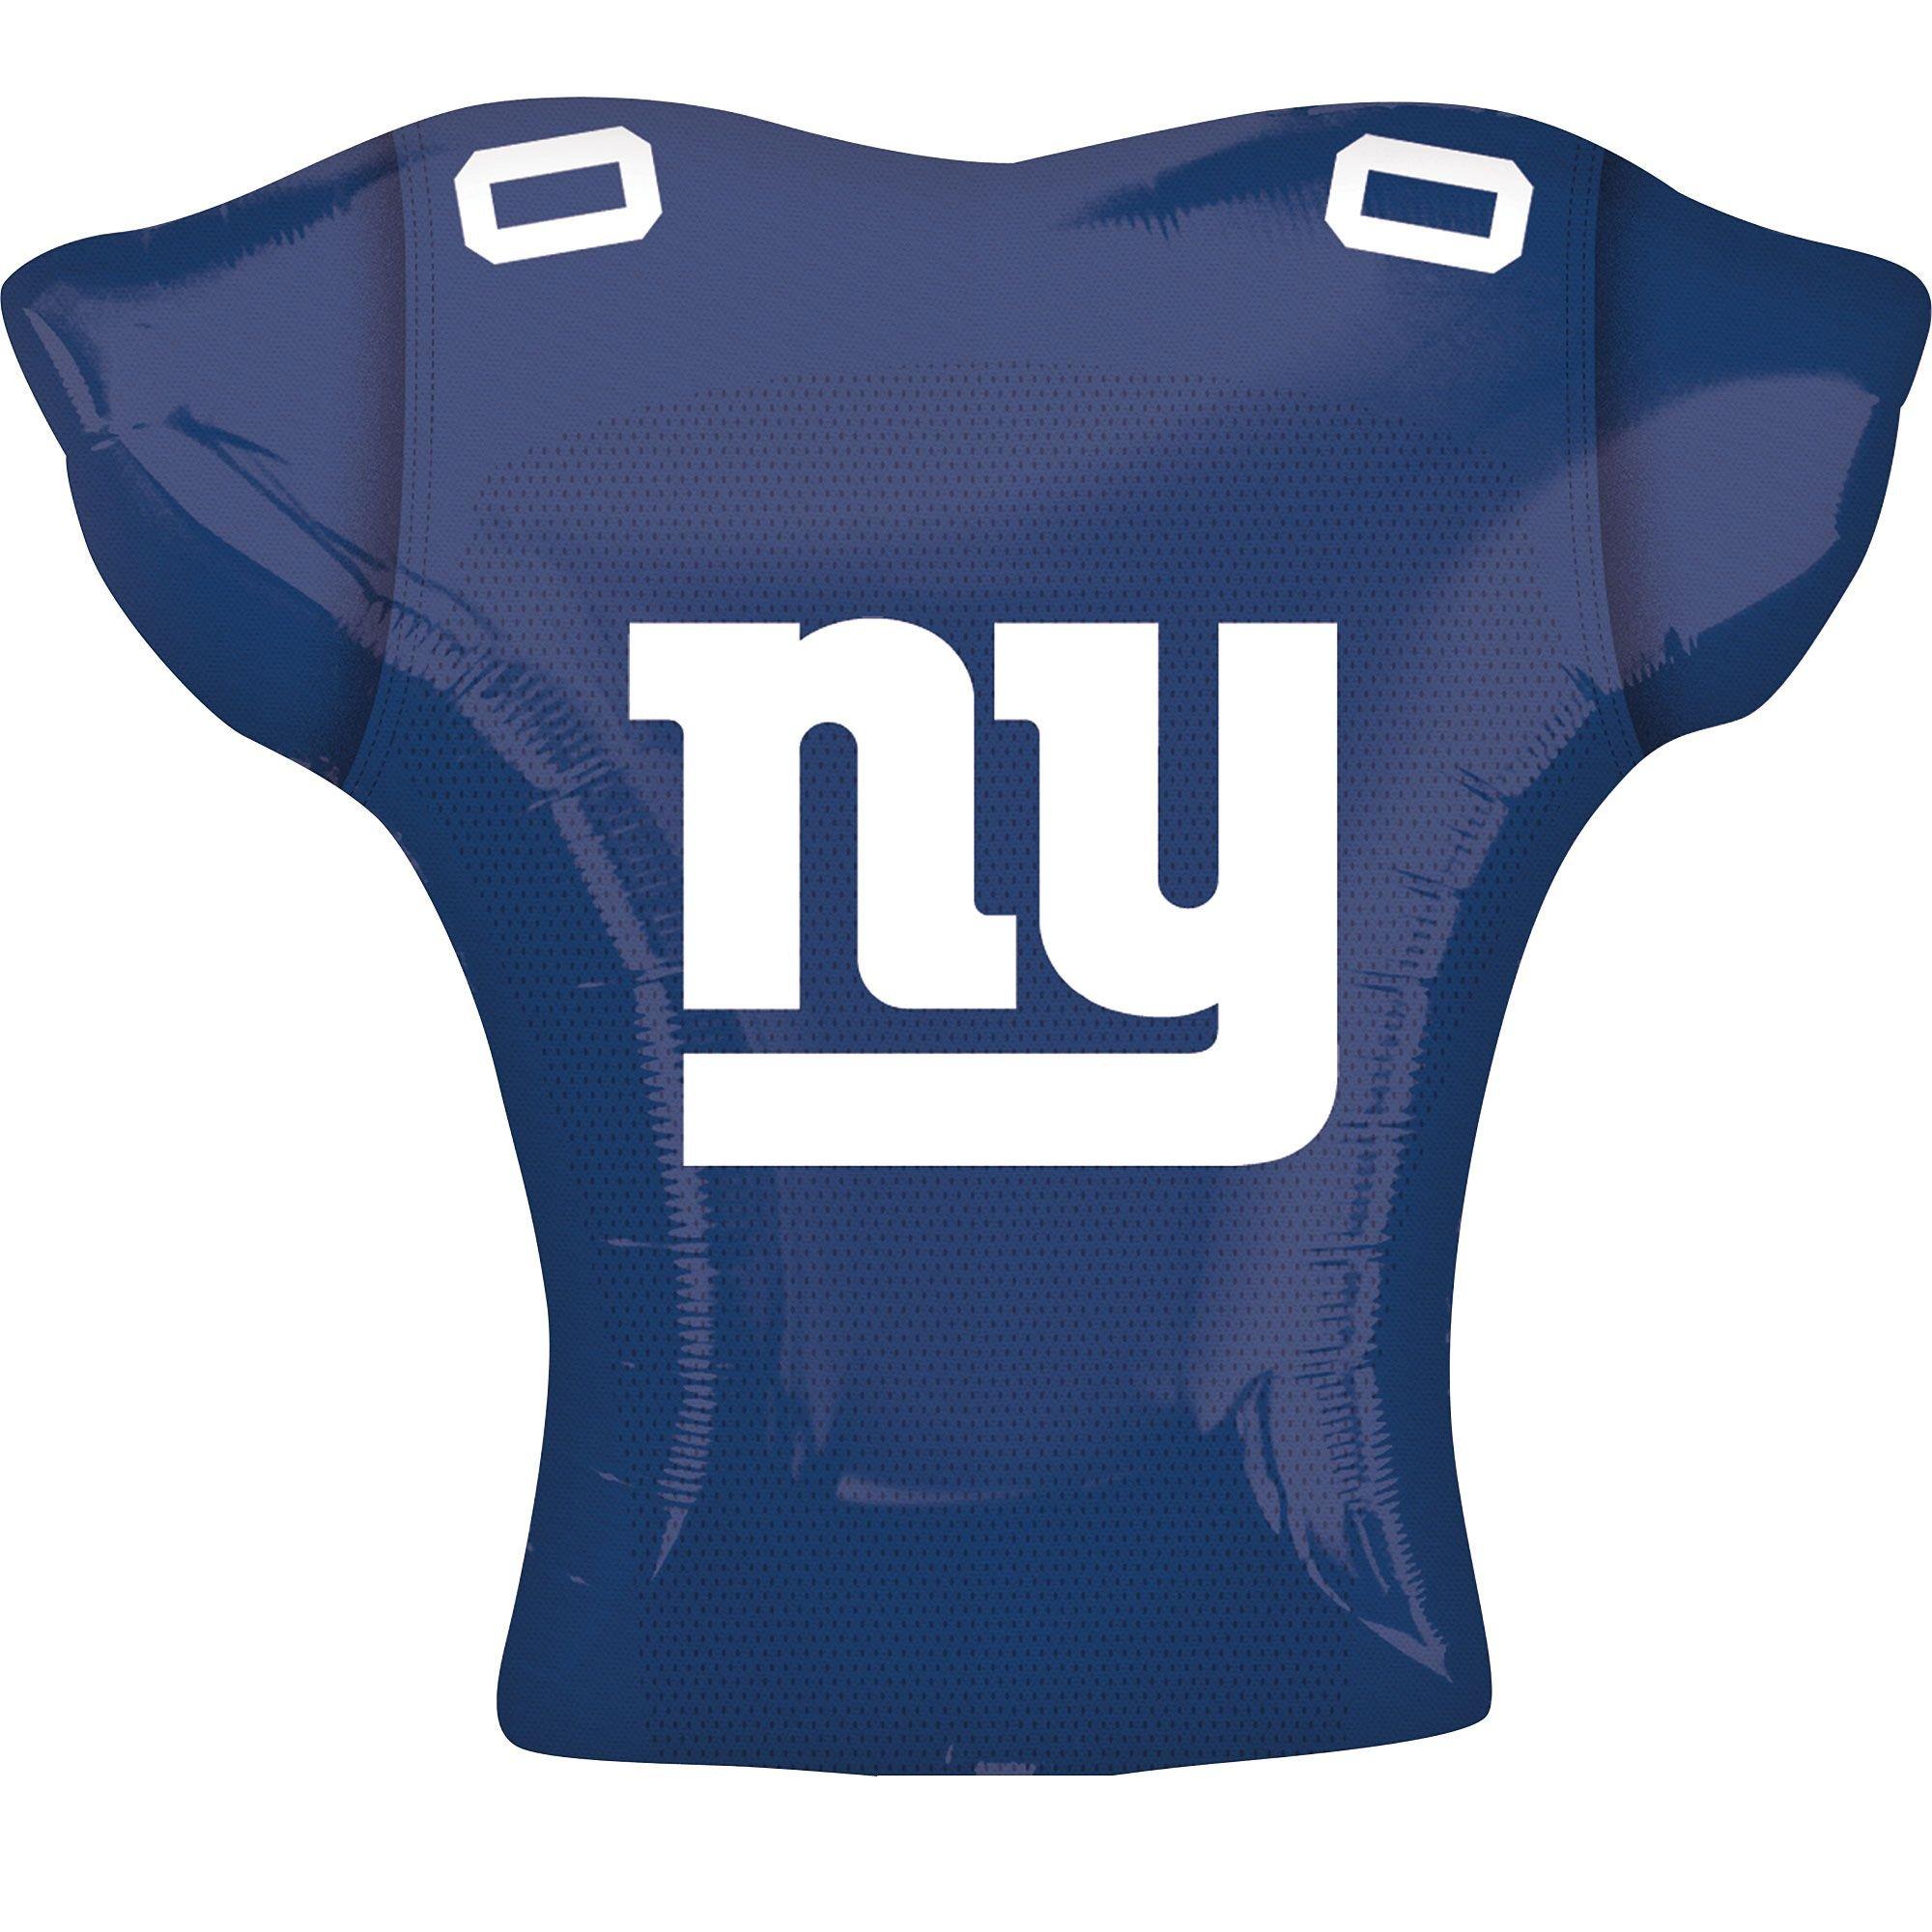 New York Giants Balloon 26in x 25in - Jersey